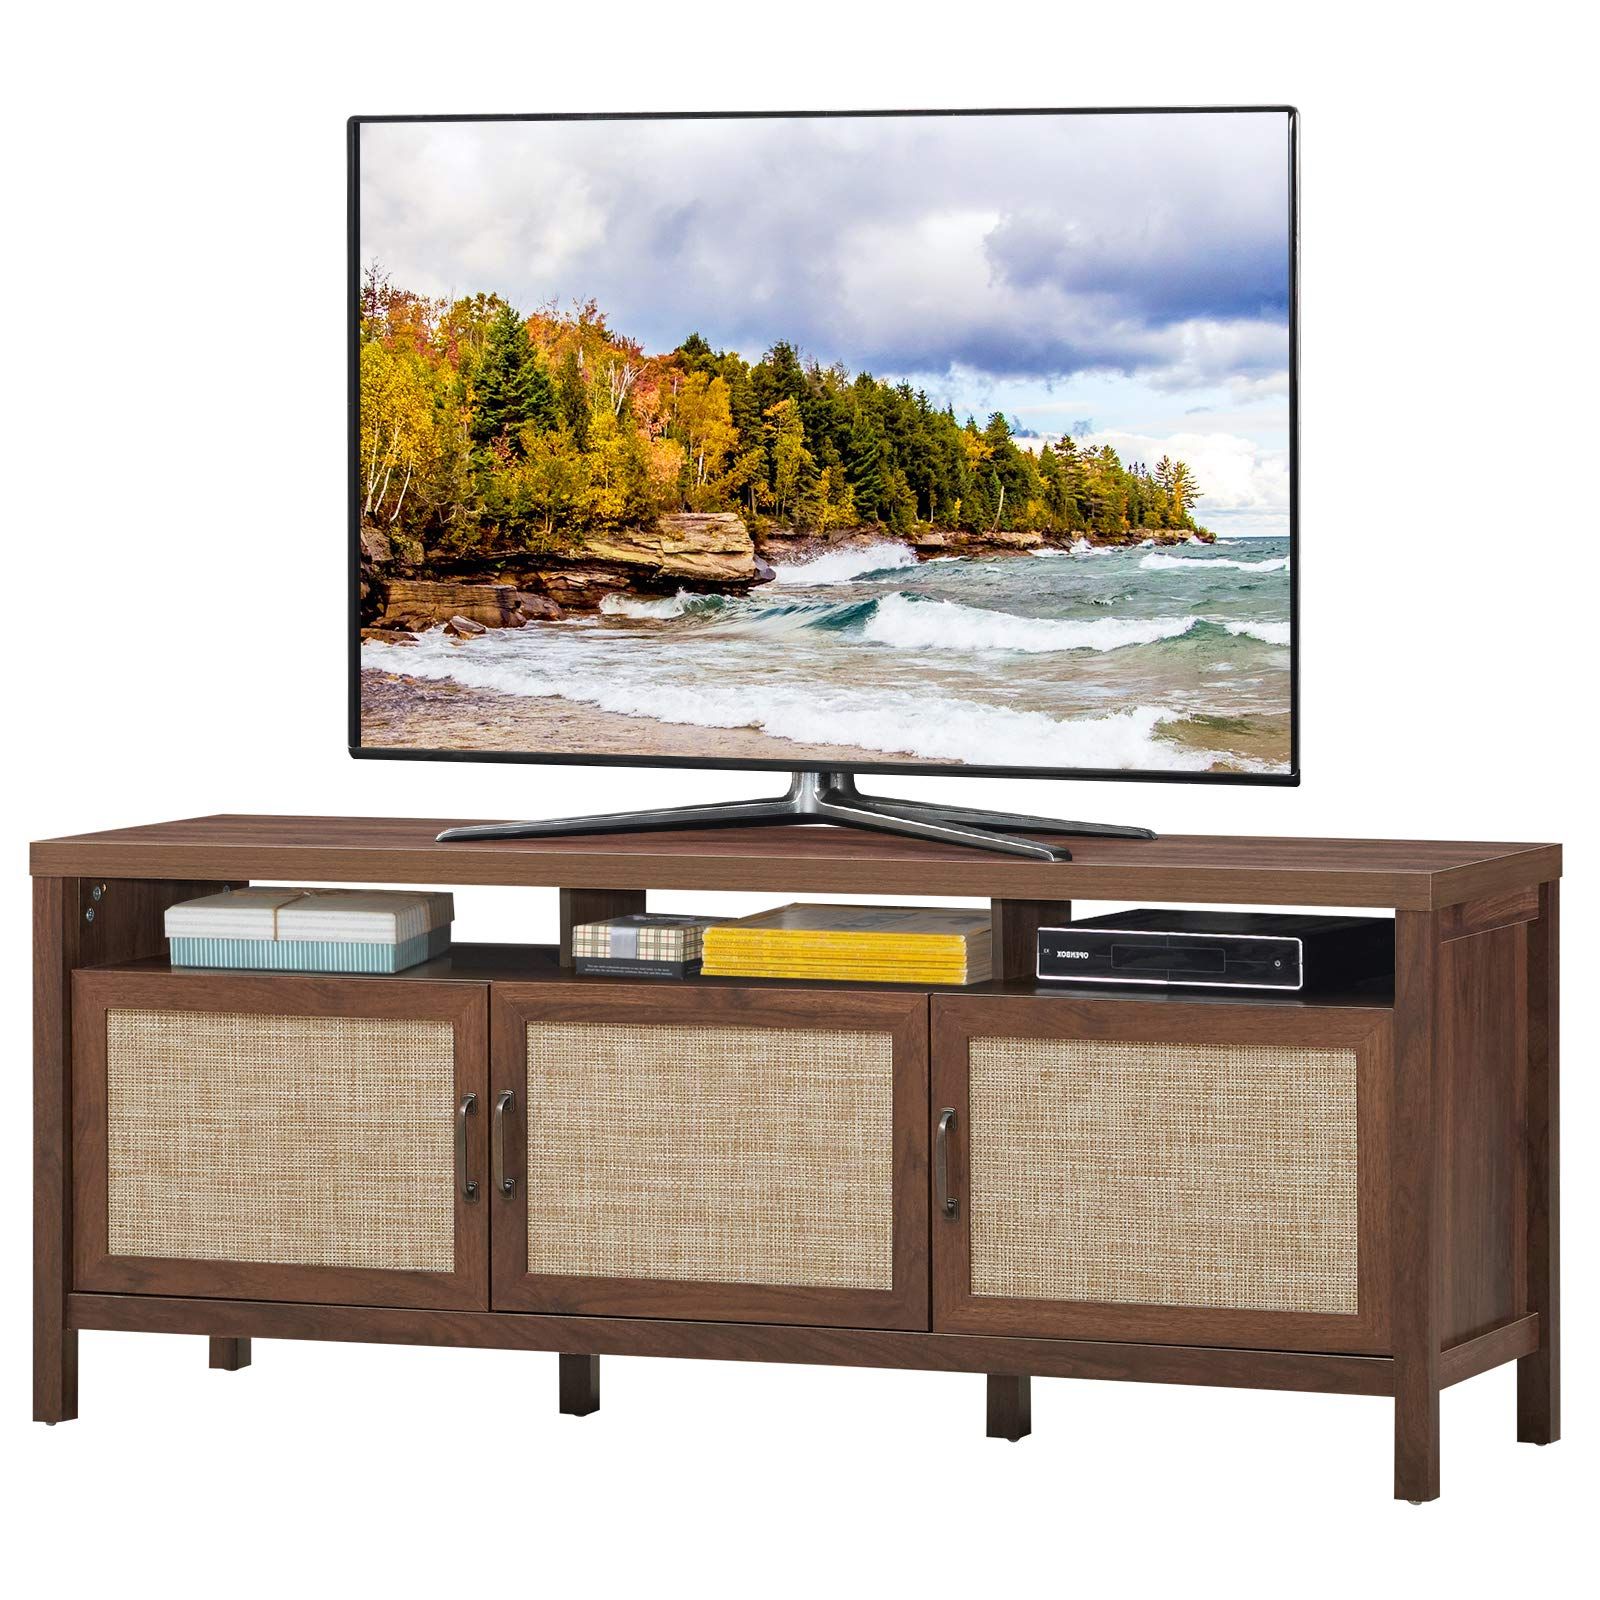 Famous Buy Tangkula Farmhouse Rattan Tv Stand, 62 Inches Modern Boho Inside Farmhouse Rattan Tv Stands (View 2 of 15)